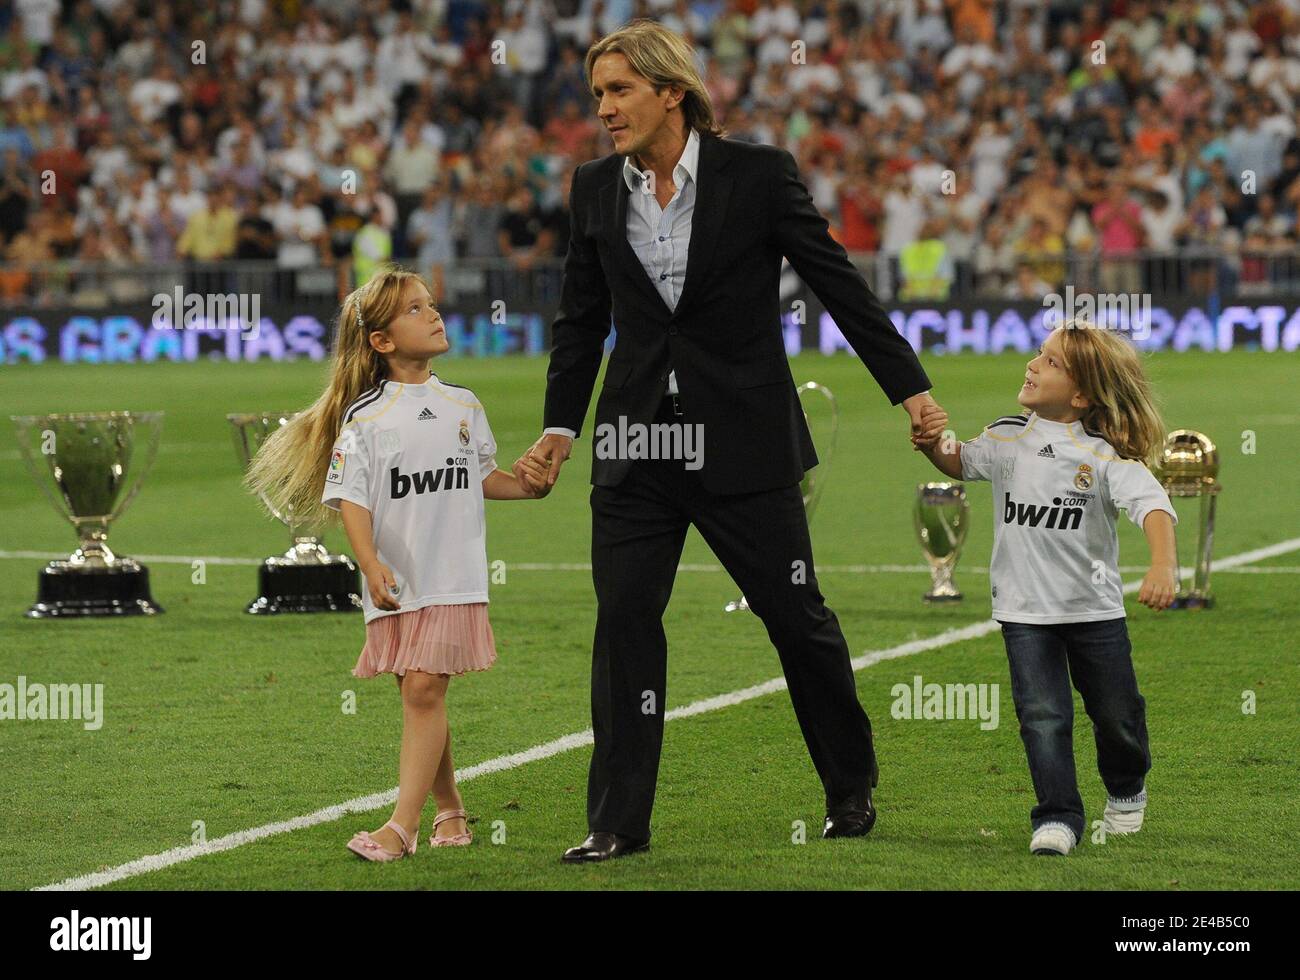 Michel Salgado waves goodbye to the Real Madrid fans before the start of the Santiago Bernabeu Trophy Soccer Match, Real Madrid vs Rosenborg at the Santiago Bernabeu stadium in Madrid, Spain on August 24, 2009. Real won 4-0. Photo by Steeve McMay/ABACAPRESS.COM Stock Photo